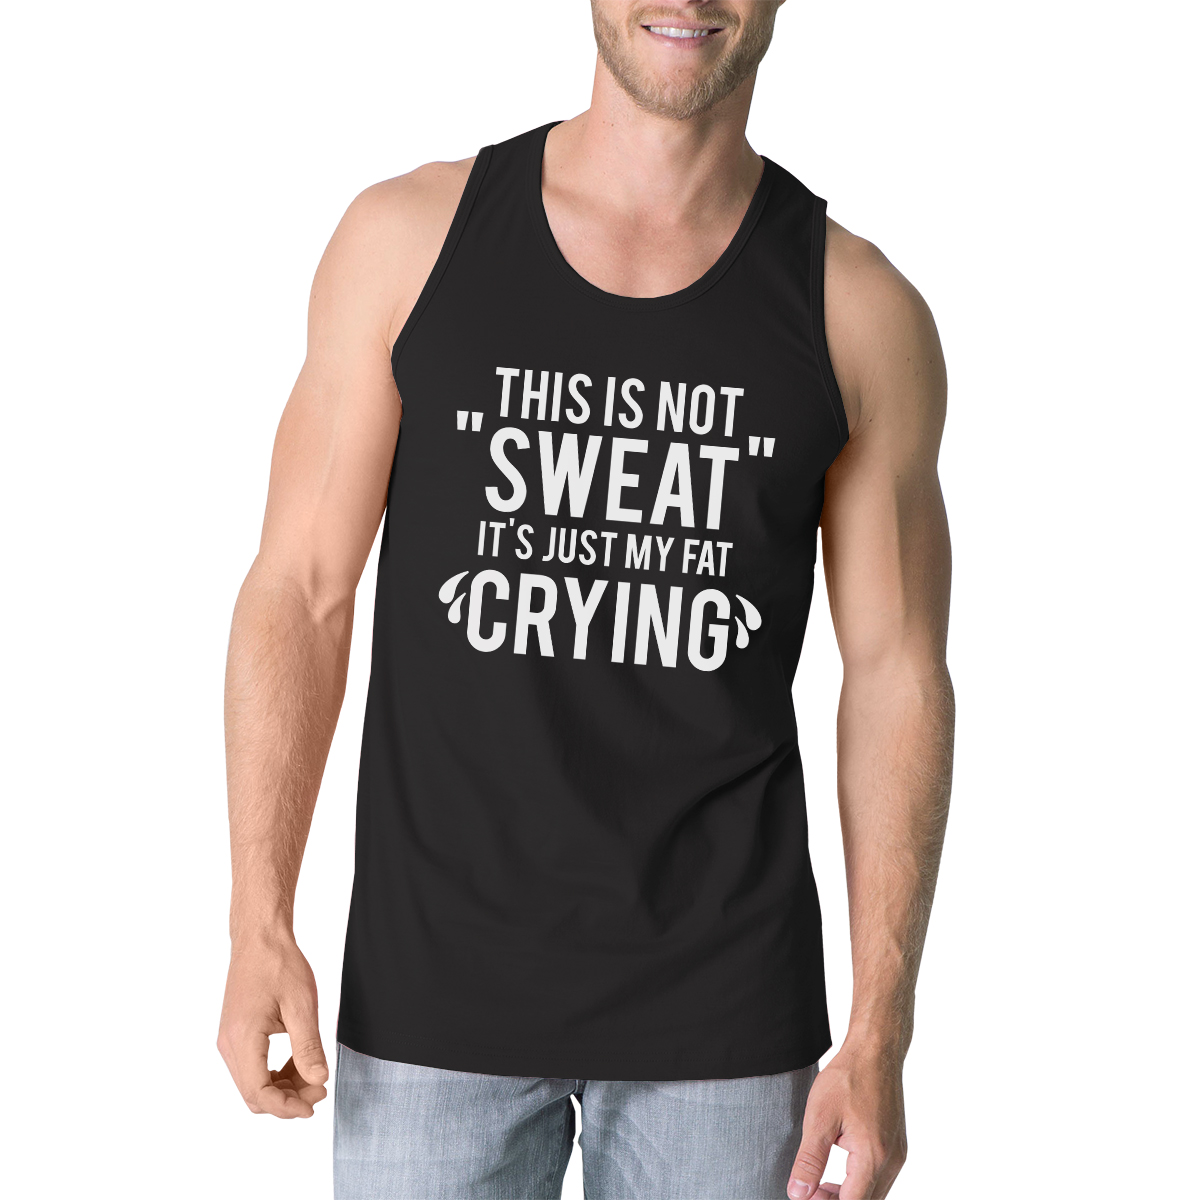 Fat Crying Mens Black Funny Graphic Gym Tank Top Humorous Tank Tops - image 1 of 4